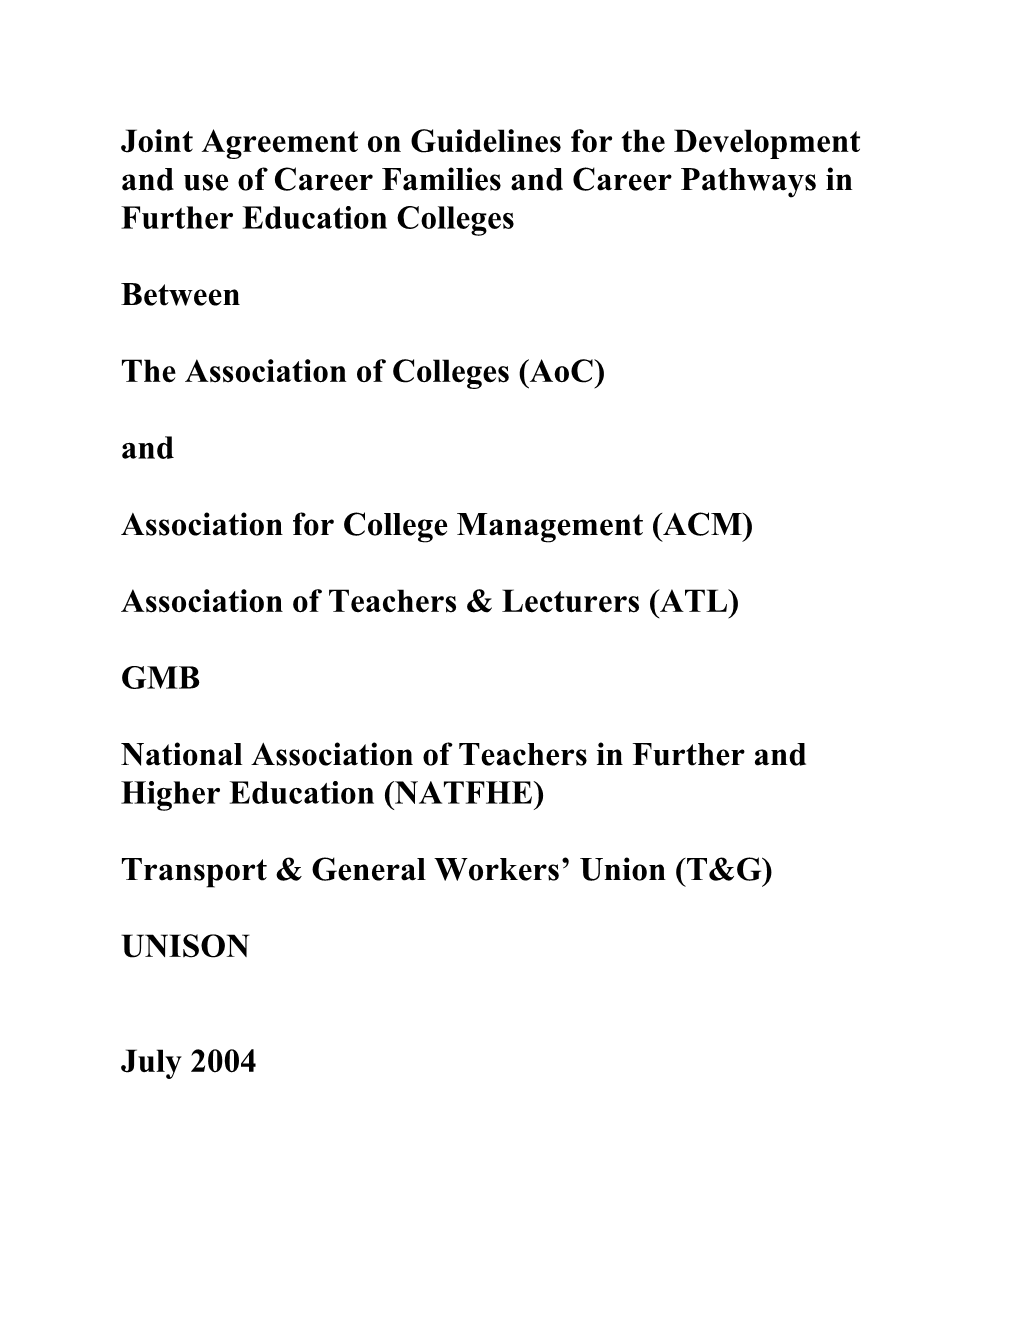 Joint Agreement on Guidelines for the Use of Career Families and Pathways in Further Education